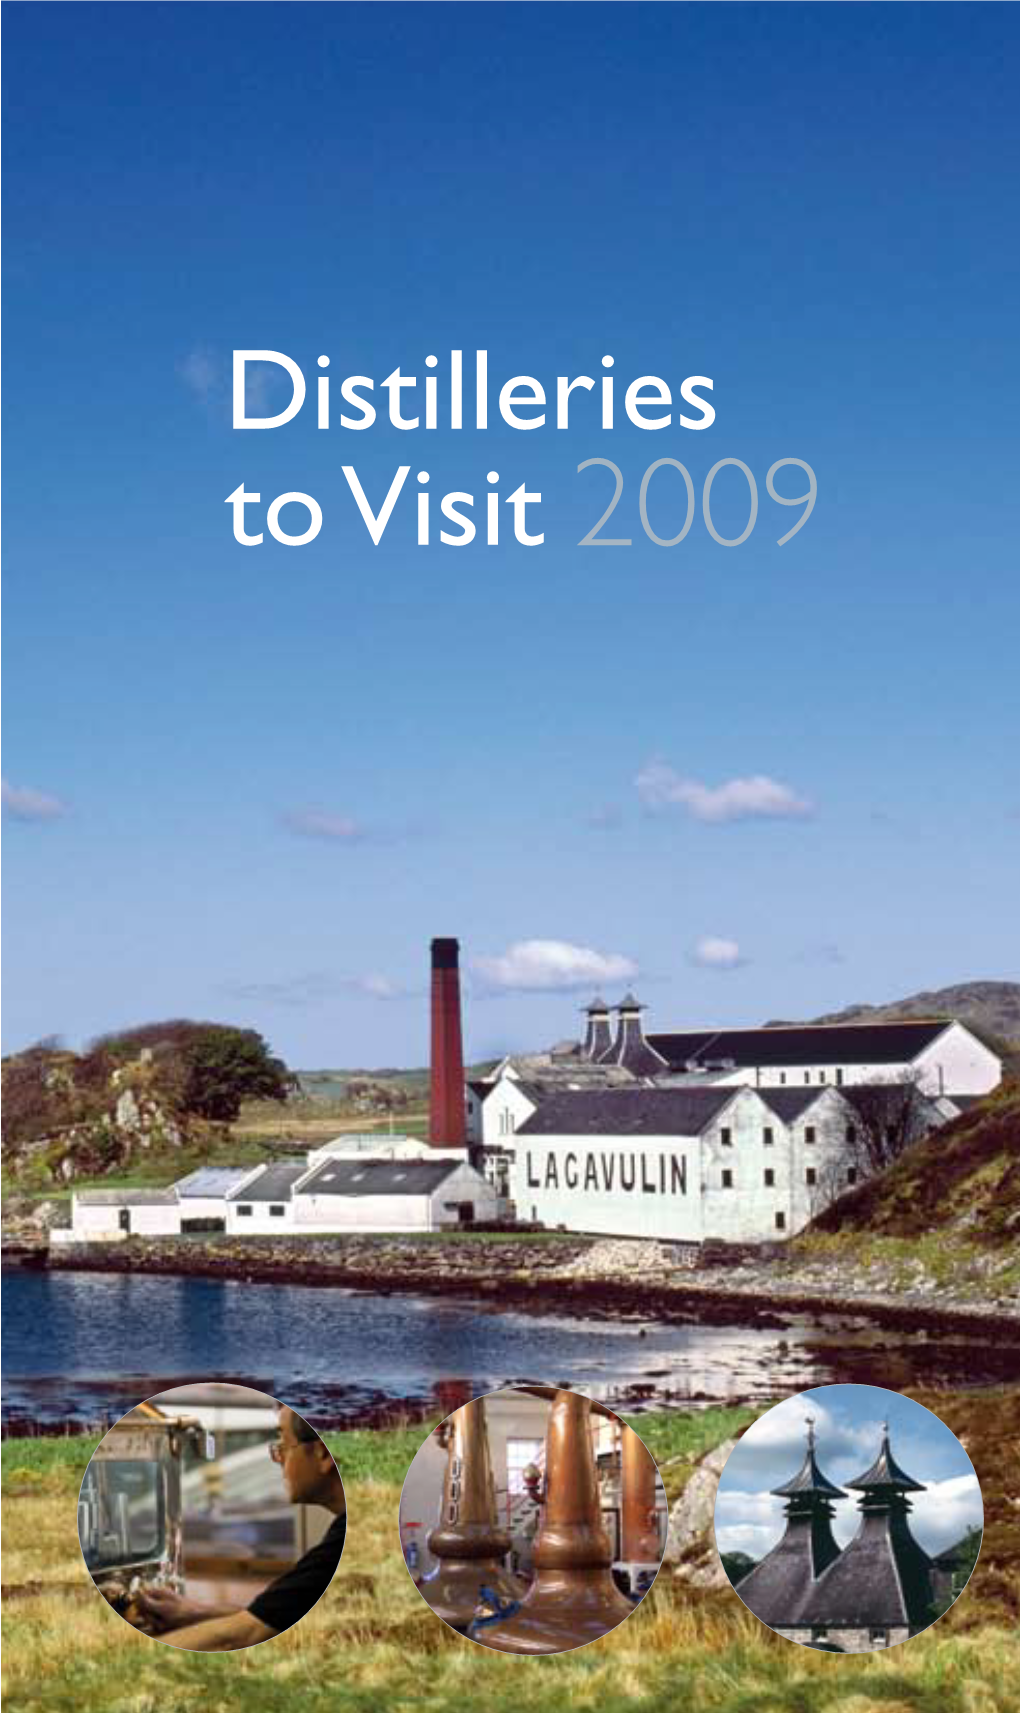 Distilleries to Visit 2009 from the Source of the Water to the Shape of the Still, a Distillery Tour Will Help to Explain What Makes Every Scotch Whisky Different